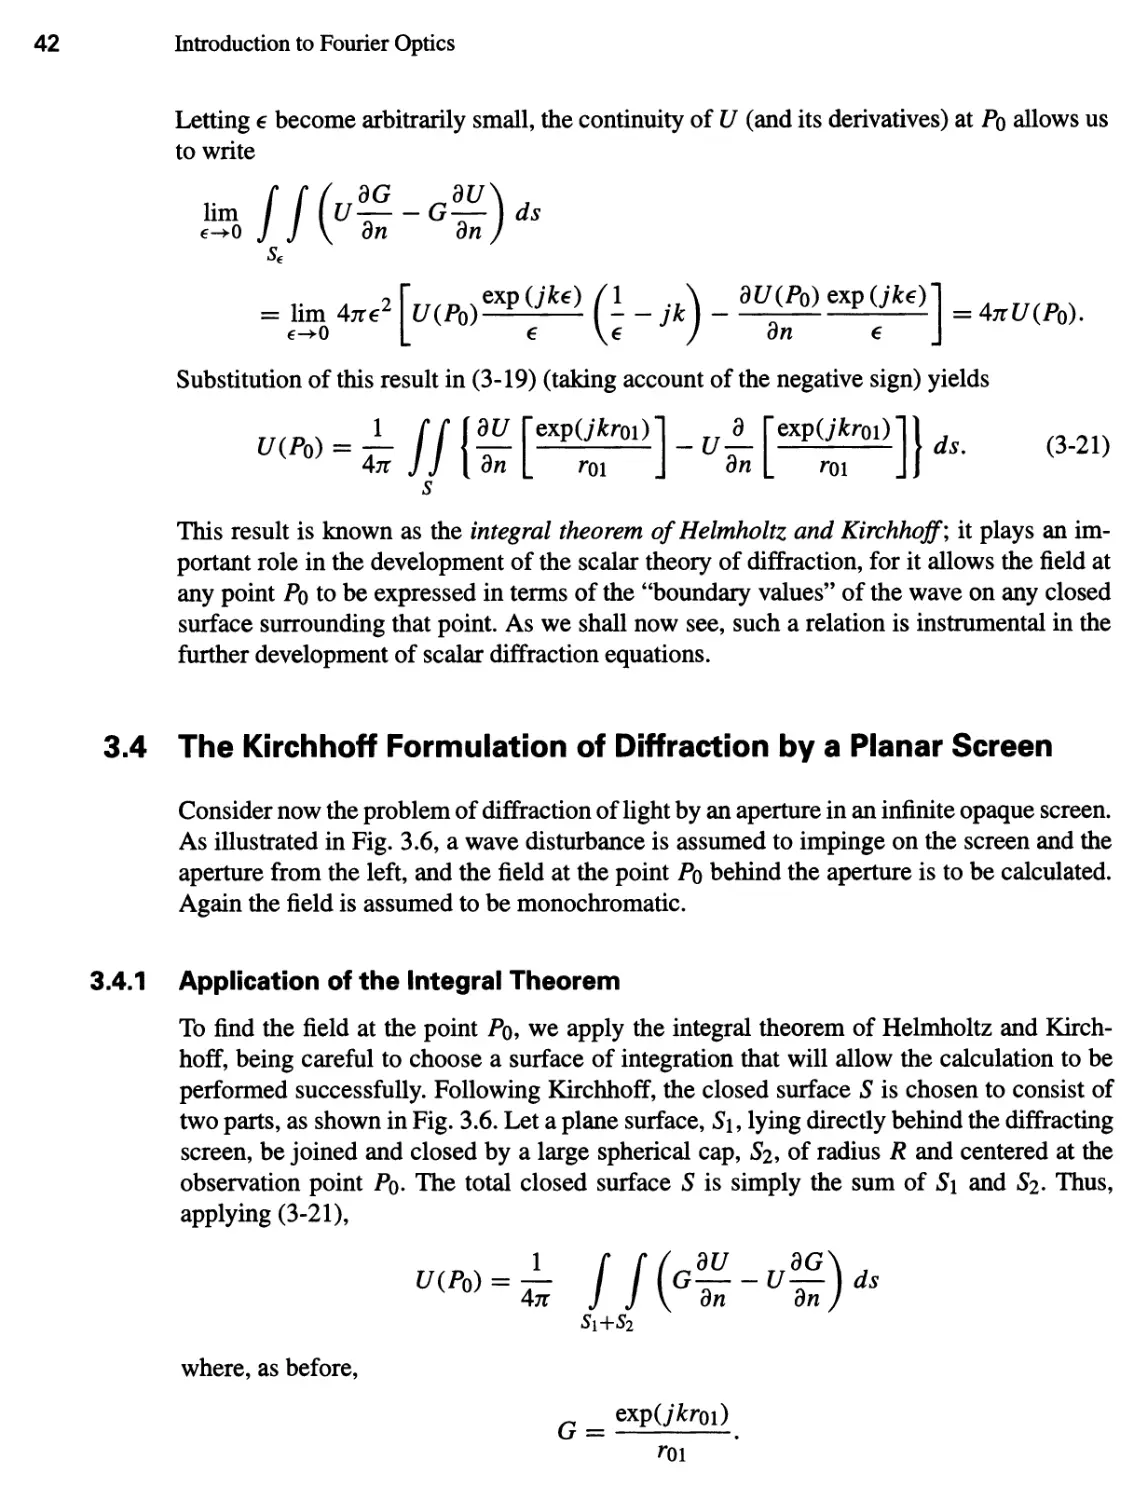 3.4 The Kirchhoff Formulation of Diffraction by a Planar Screen 42